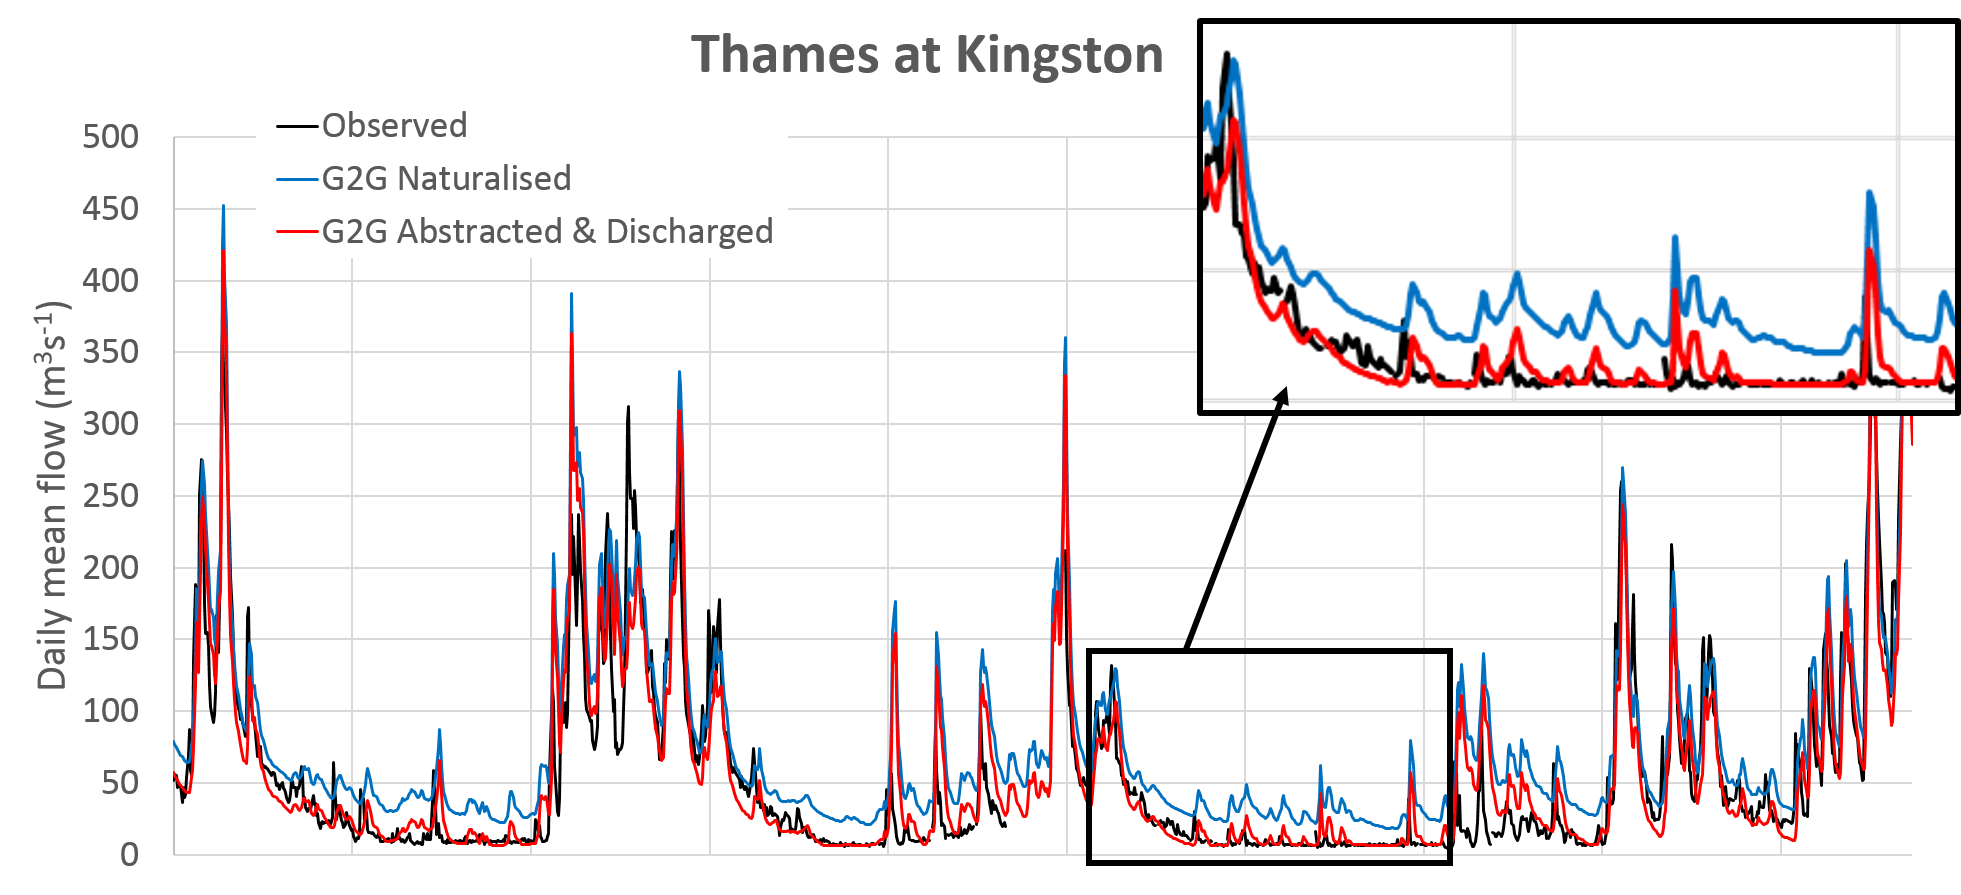 Daily mean river flow for the Thames at Kingston. Observed river flow (black), G2G simulated naturalised river flow (blue) and G2G simulated river flow accounting for abstractions and discharges (red).